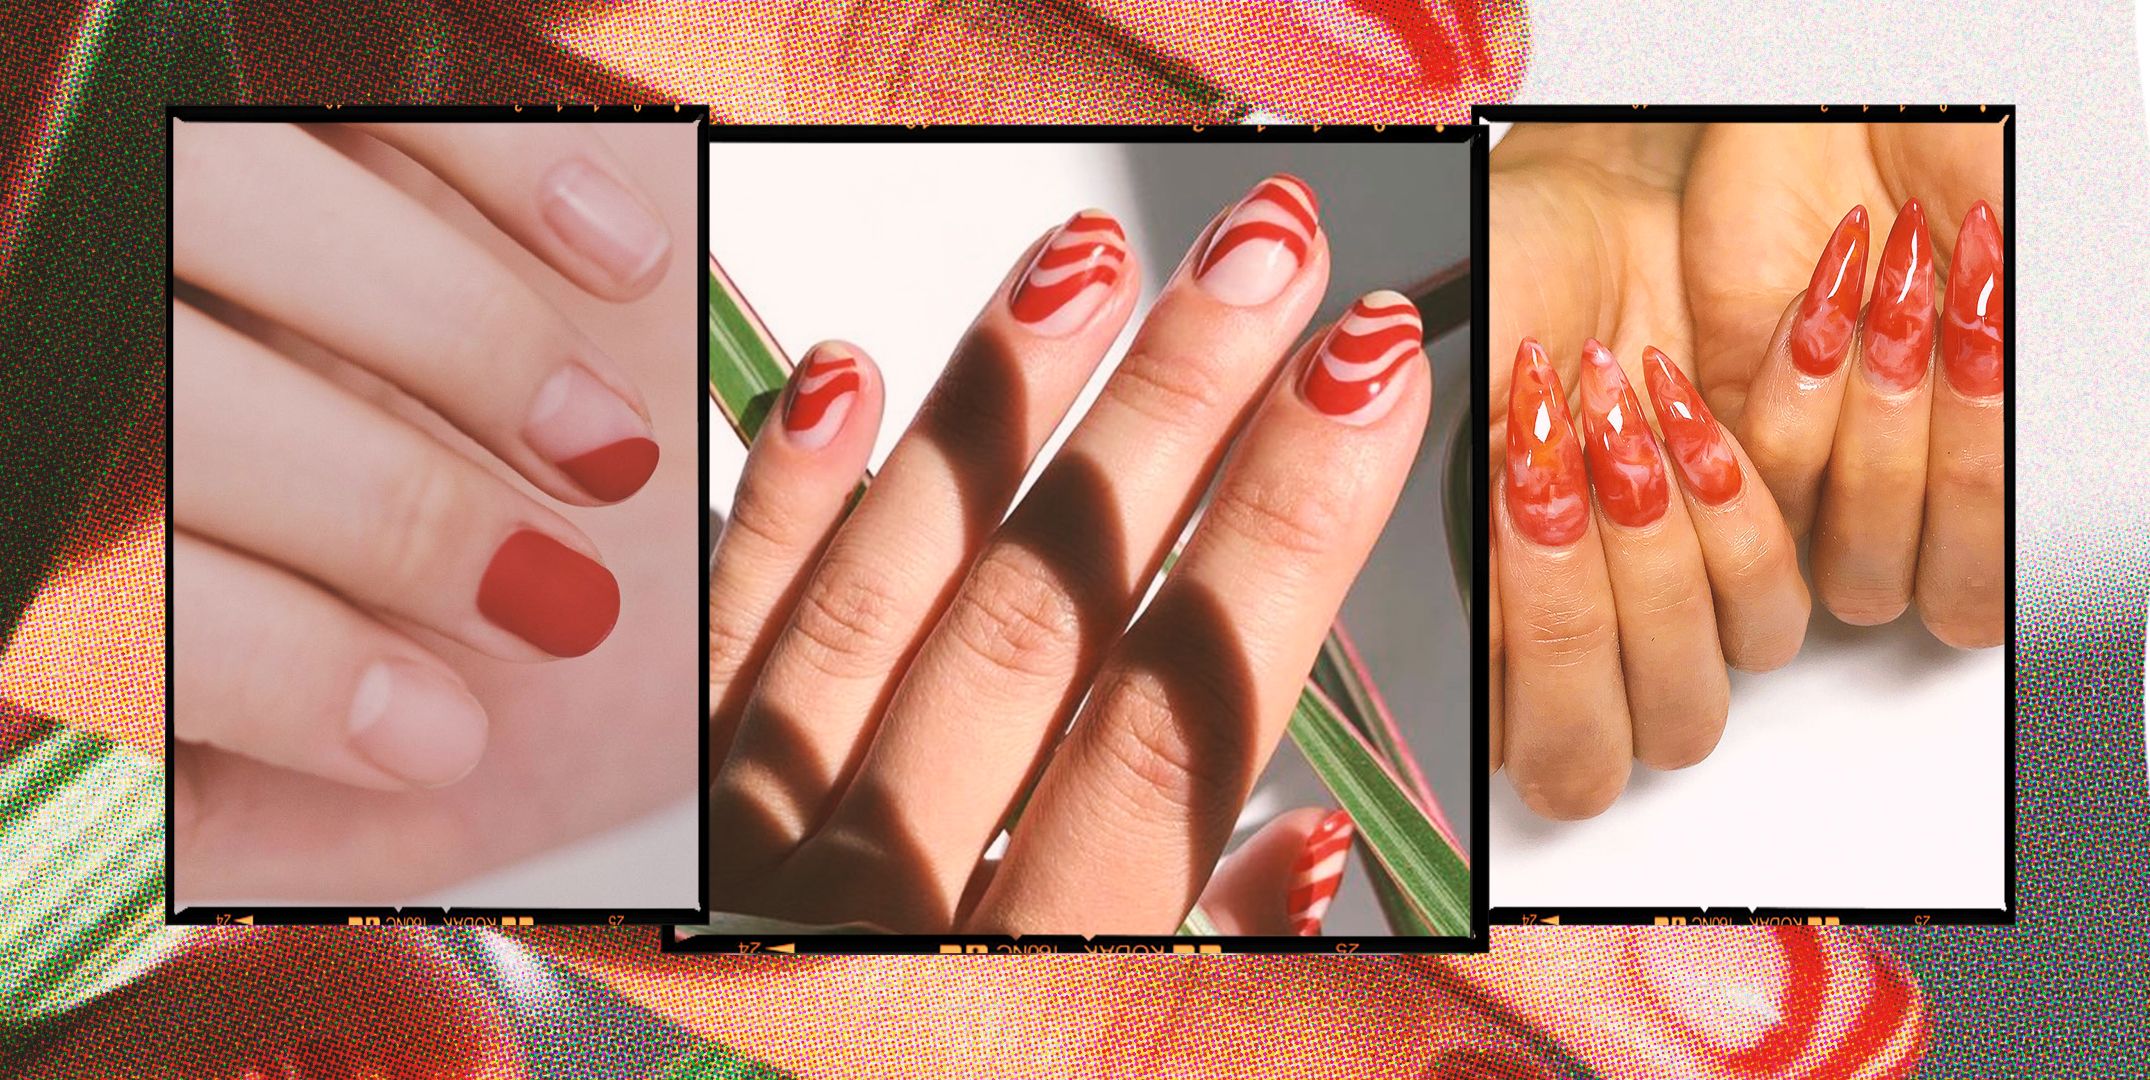 50+ Red Nails That Are Incredibly Trendy Right Now! - The Pink Brunette